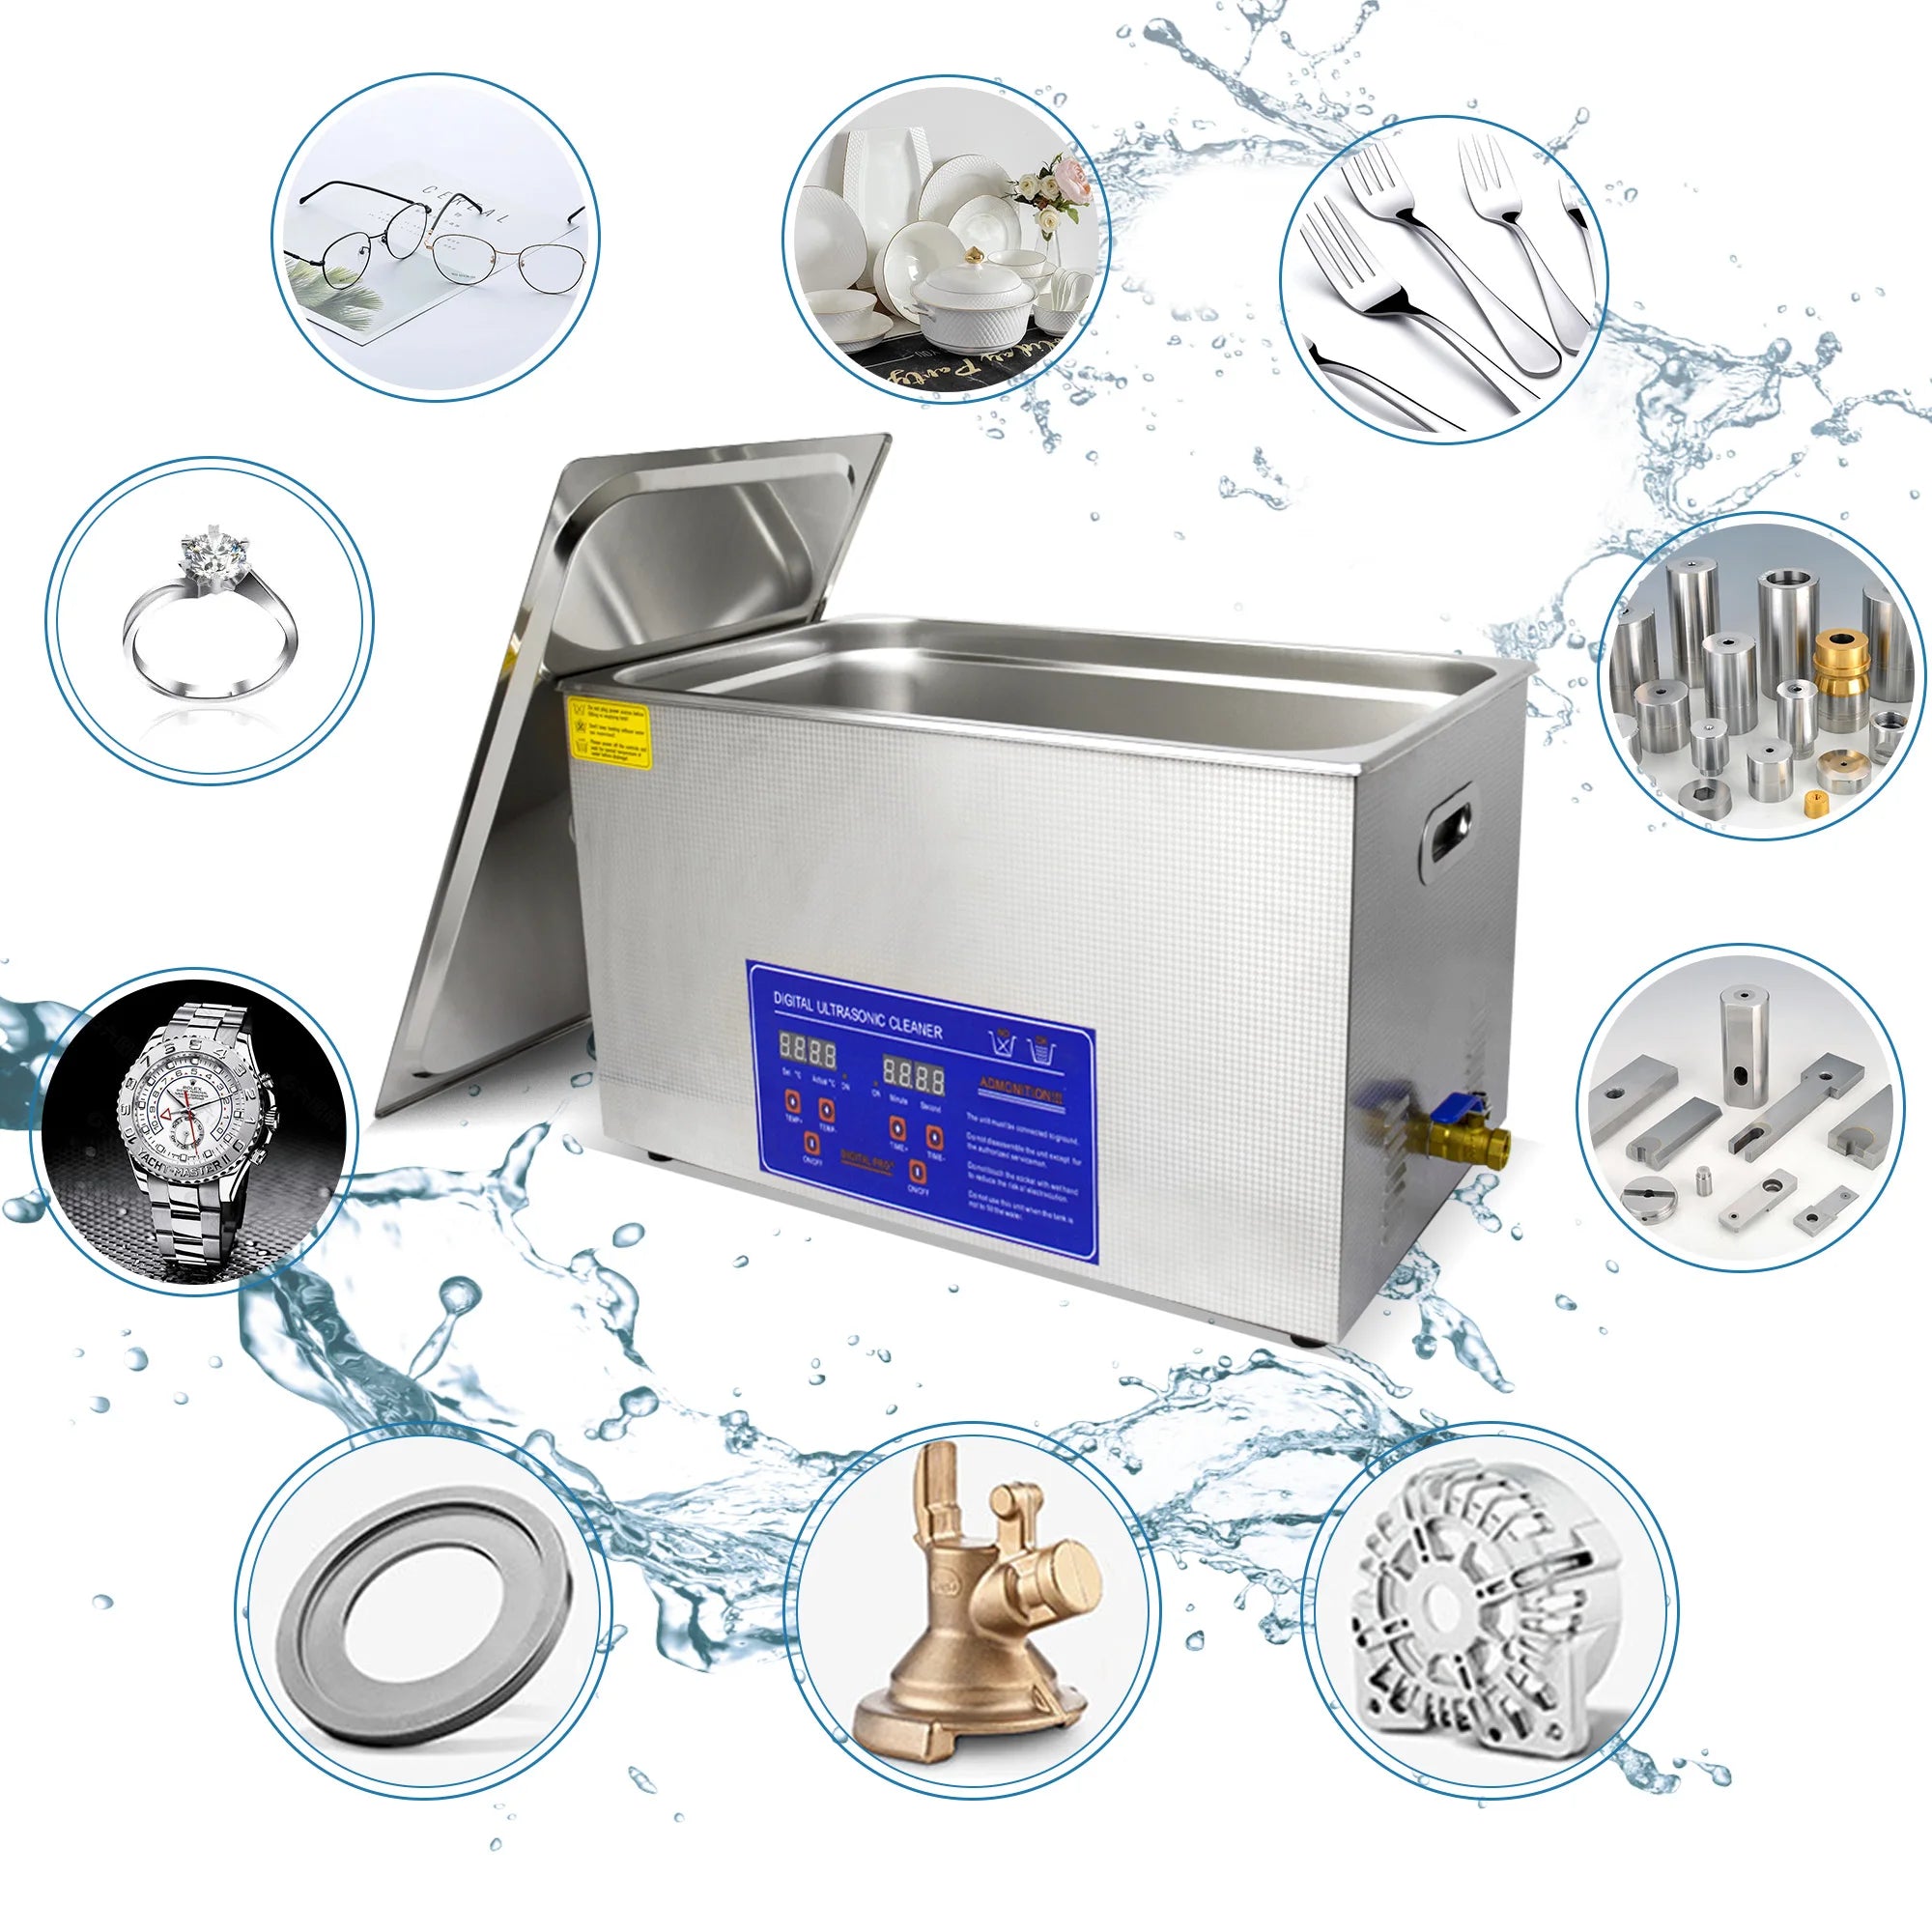 2/3/6/10L Stainless Steel Ultrasonic Cleaner 40kHz Industrial Ultrasound Washing Machine Home Appliances